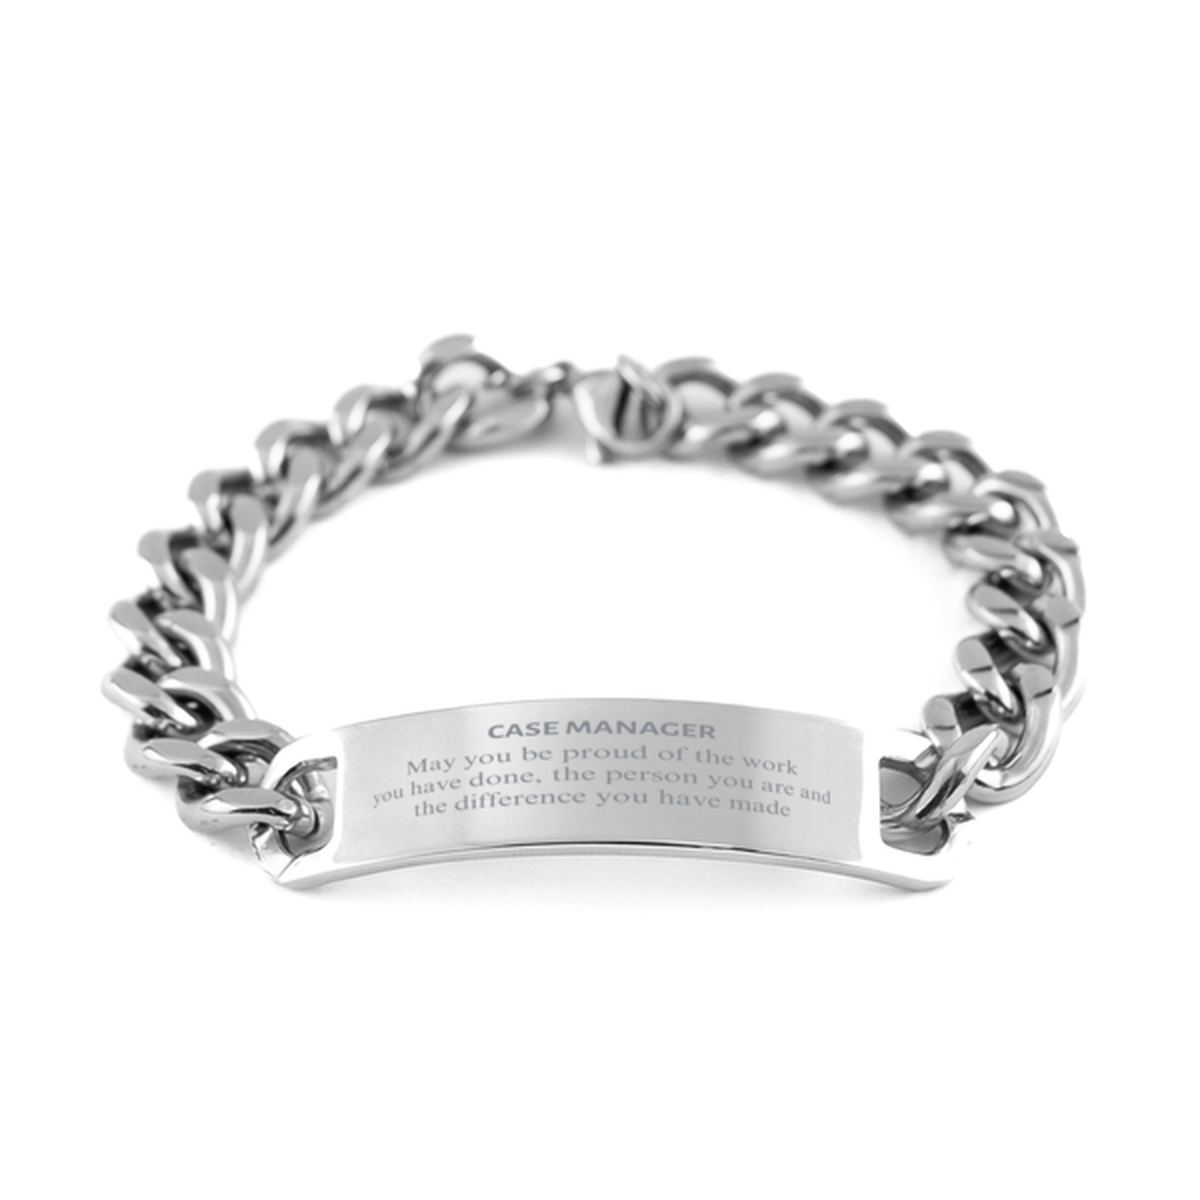 Case Manager May you be proud of the work you have done, Retirement Case Manager Cuban Chain Stainless Steel Bracelet for Colleague Appreciation Gifts Amazing for Case Manager